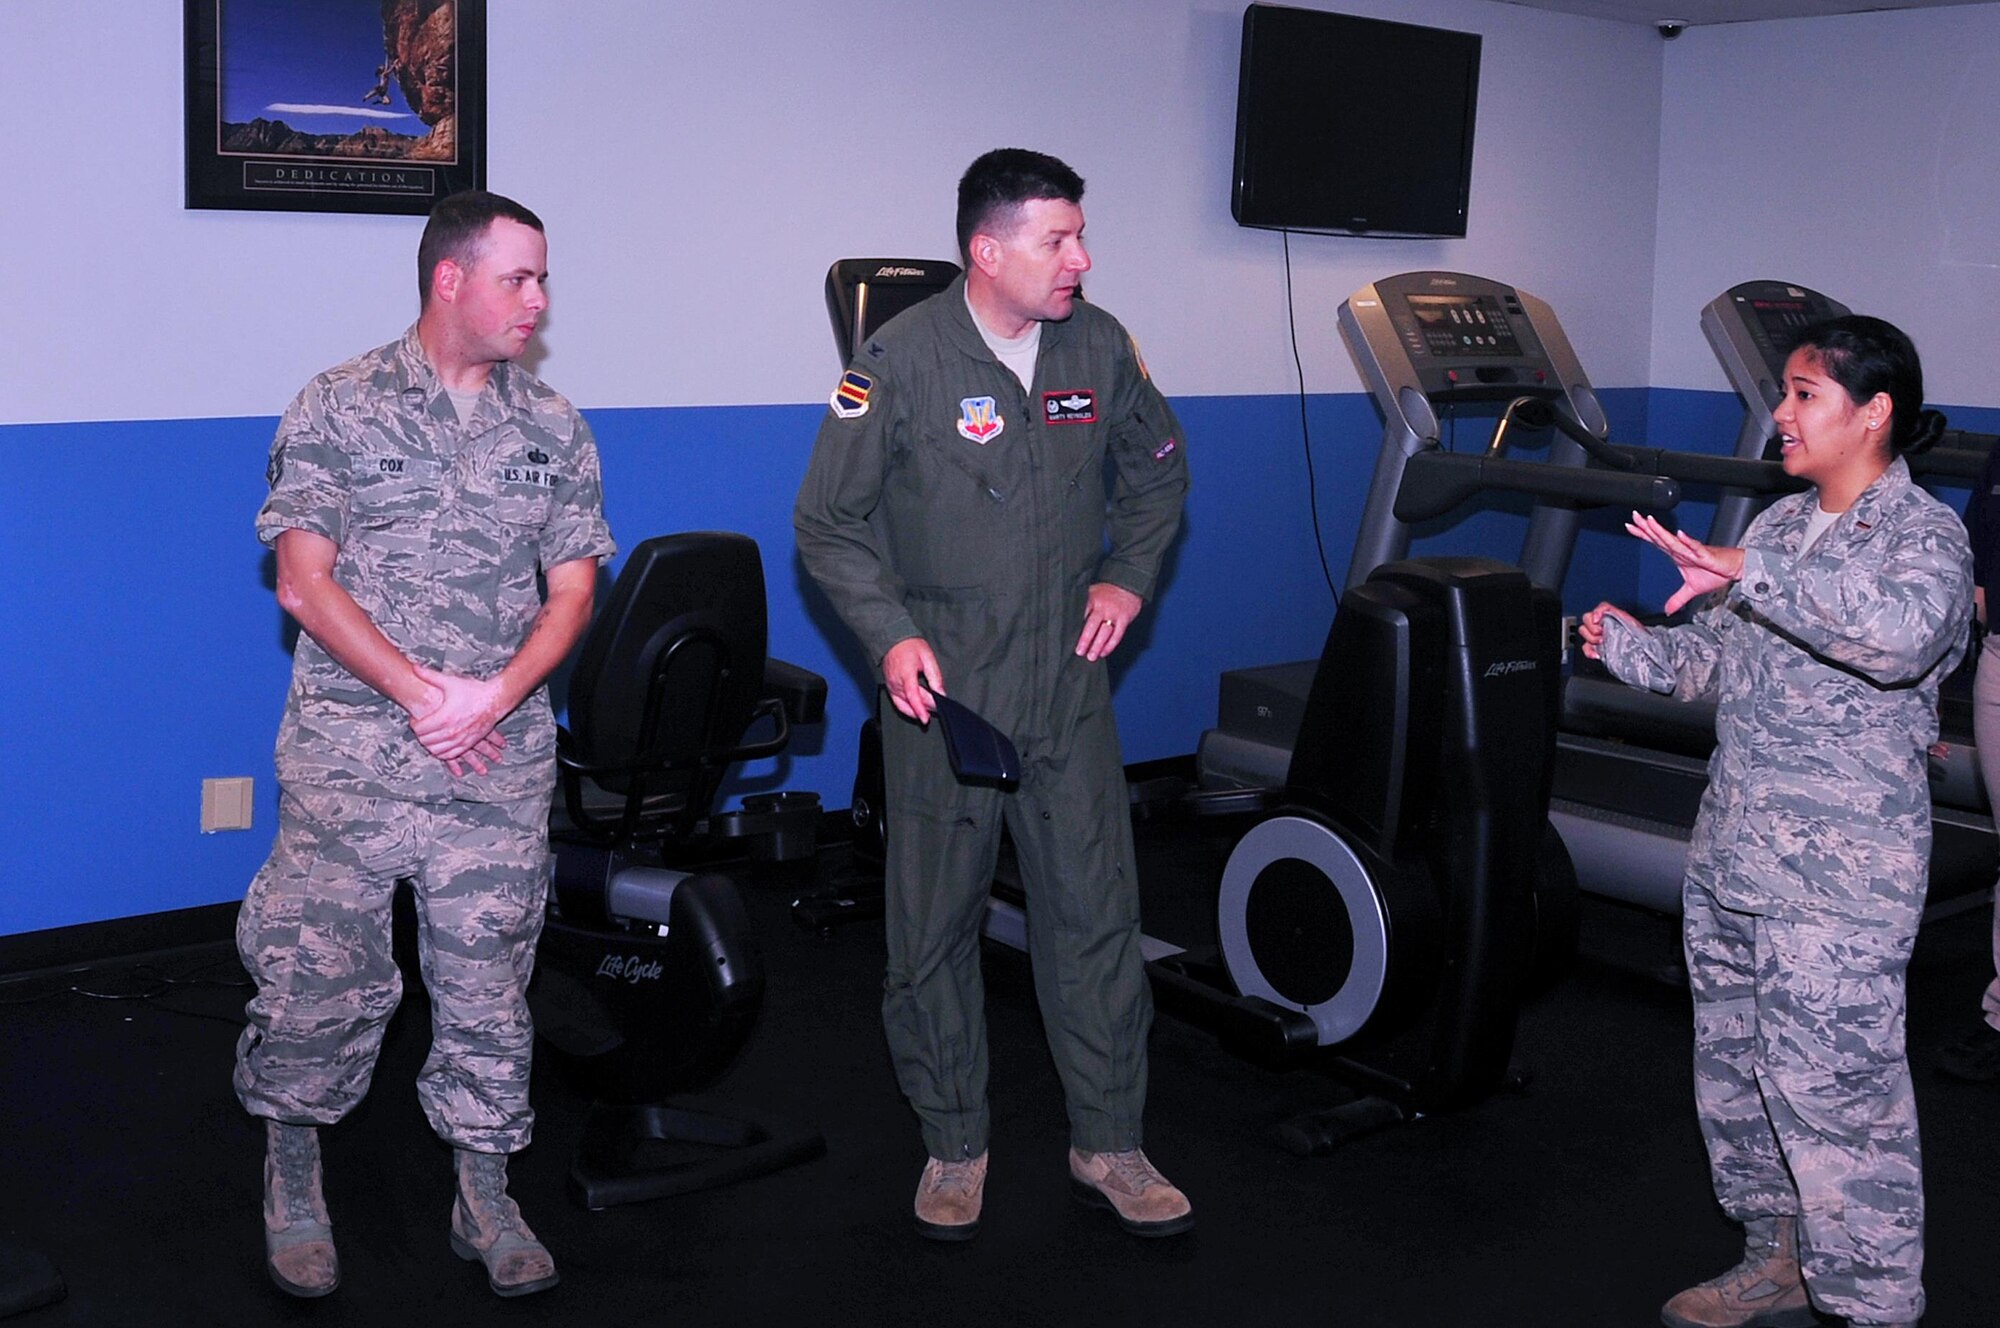 U.S. Air Force 2nd Lt. Cristina Dalida, 55th Force Support Squadron officer-in-charge of fitness and recreation, welcomes U.S. Air Force Col. Marty Reynolds, commander of the 55th Wing, to the grand opening of the after-hours gym located inside of the field house at Offutt Air Force Base, Neb, July 7, 2016.  The facility was added to align with larger Air Force health initiatives focused on living a healthy lifestyle.  (U.S. Air Force photo by D.P. Heard/Released)